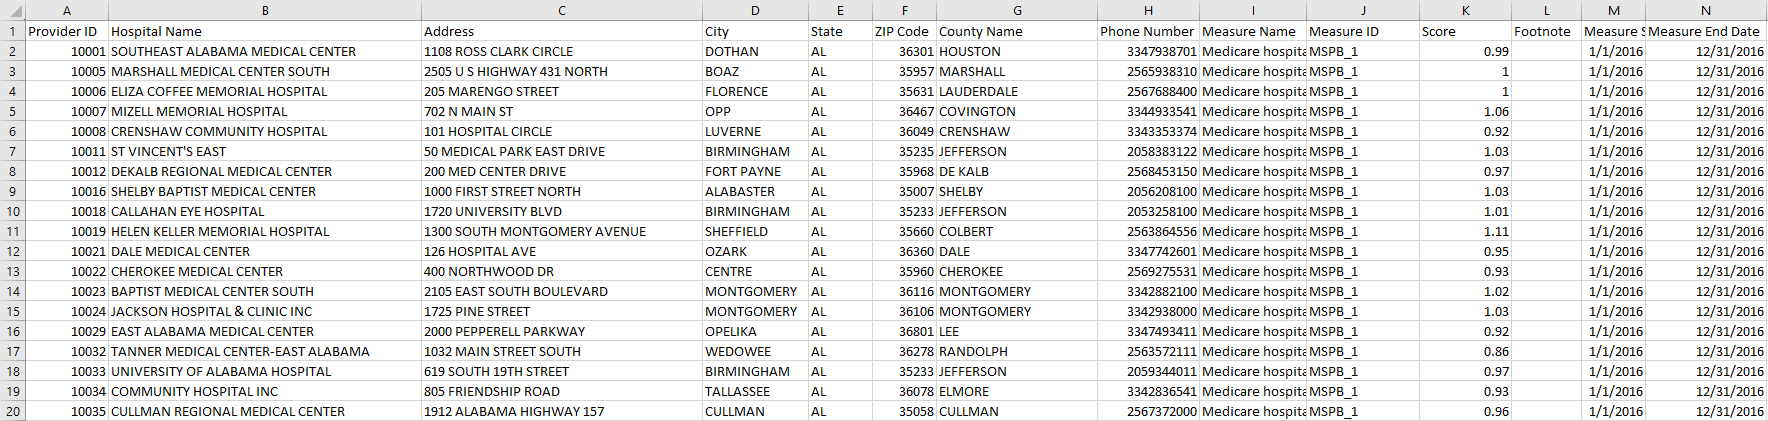 spreadsheet of 20 rows of hospitals with addresses in multiple fields (street, city, state, zip_code)